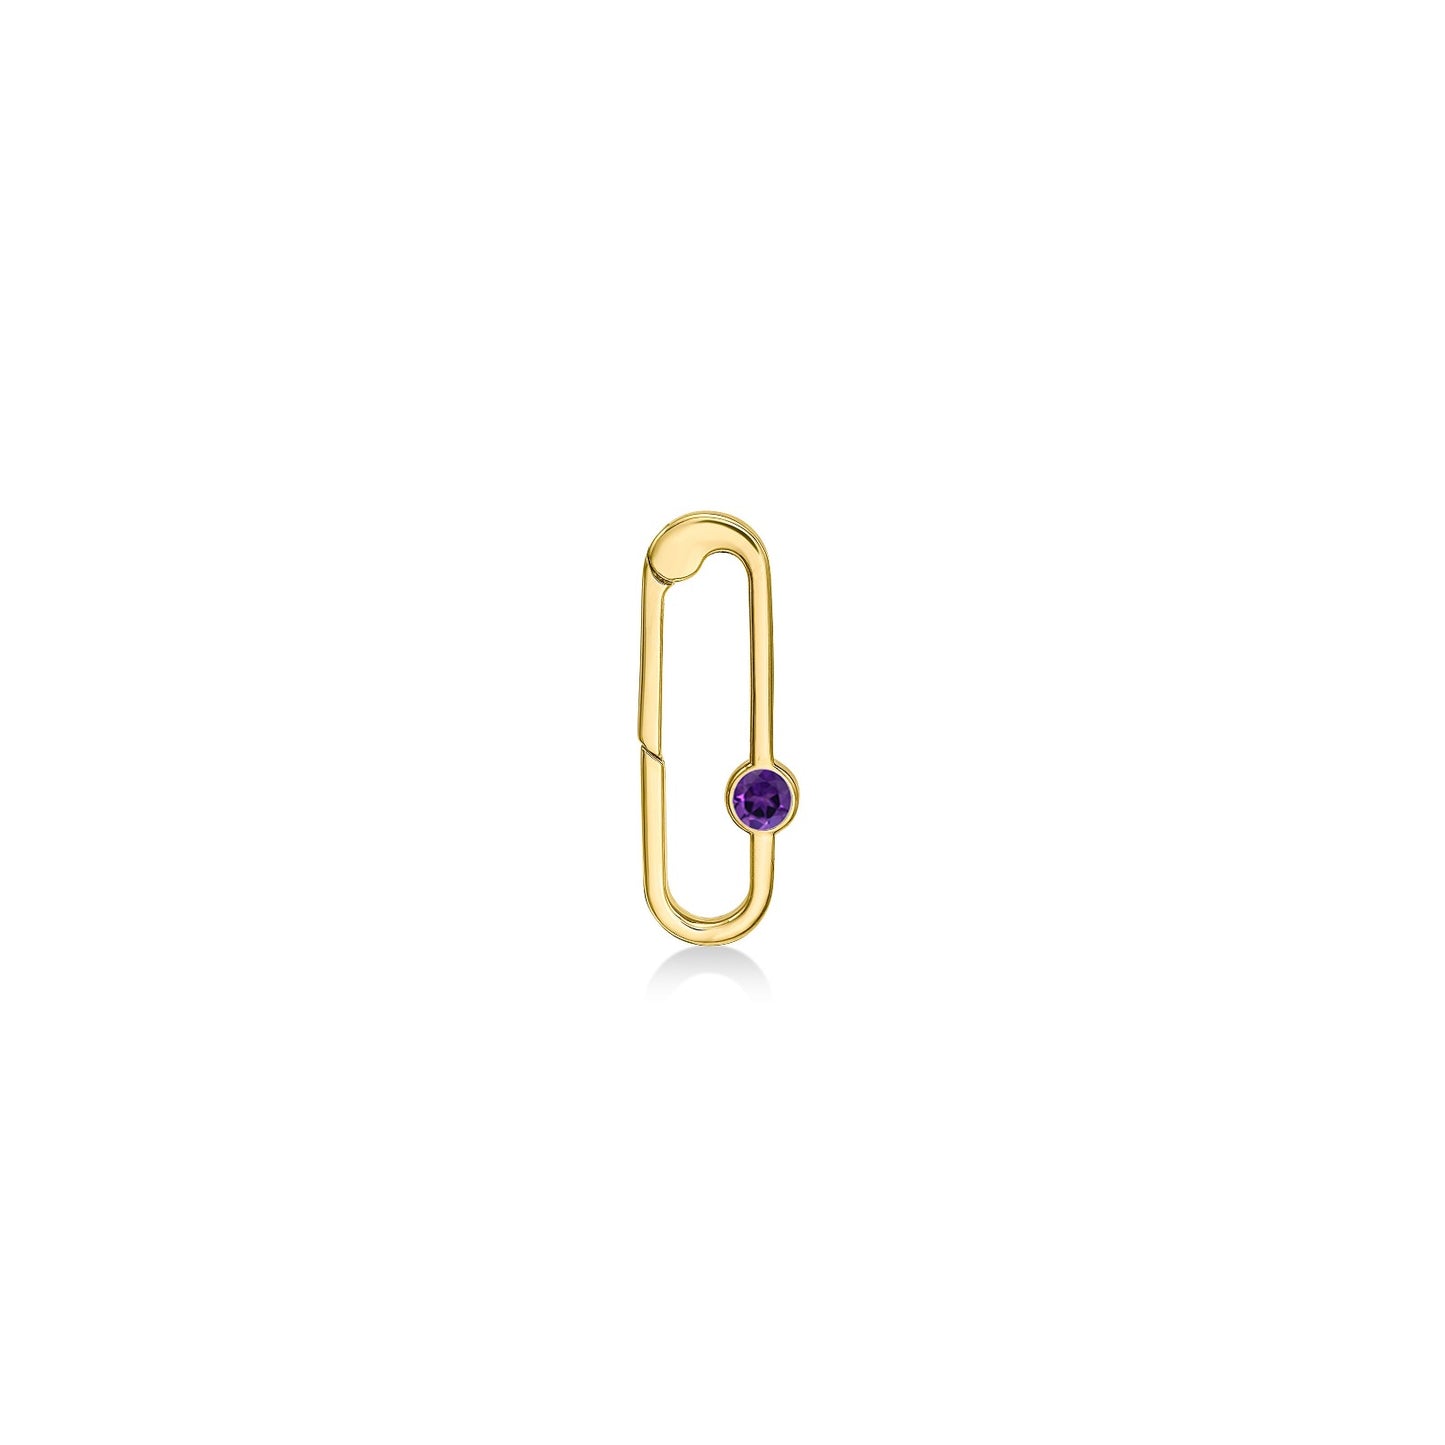 Paperclip charm lock with amethyst